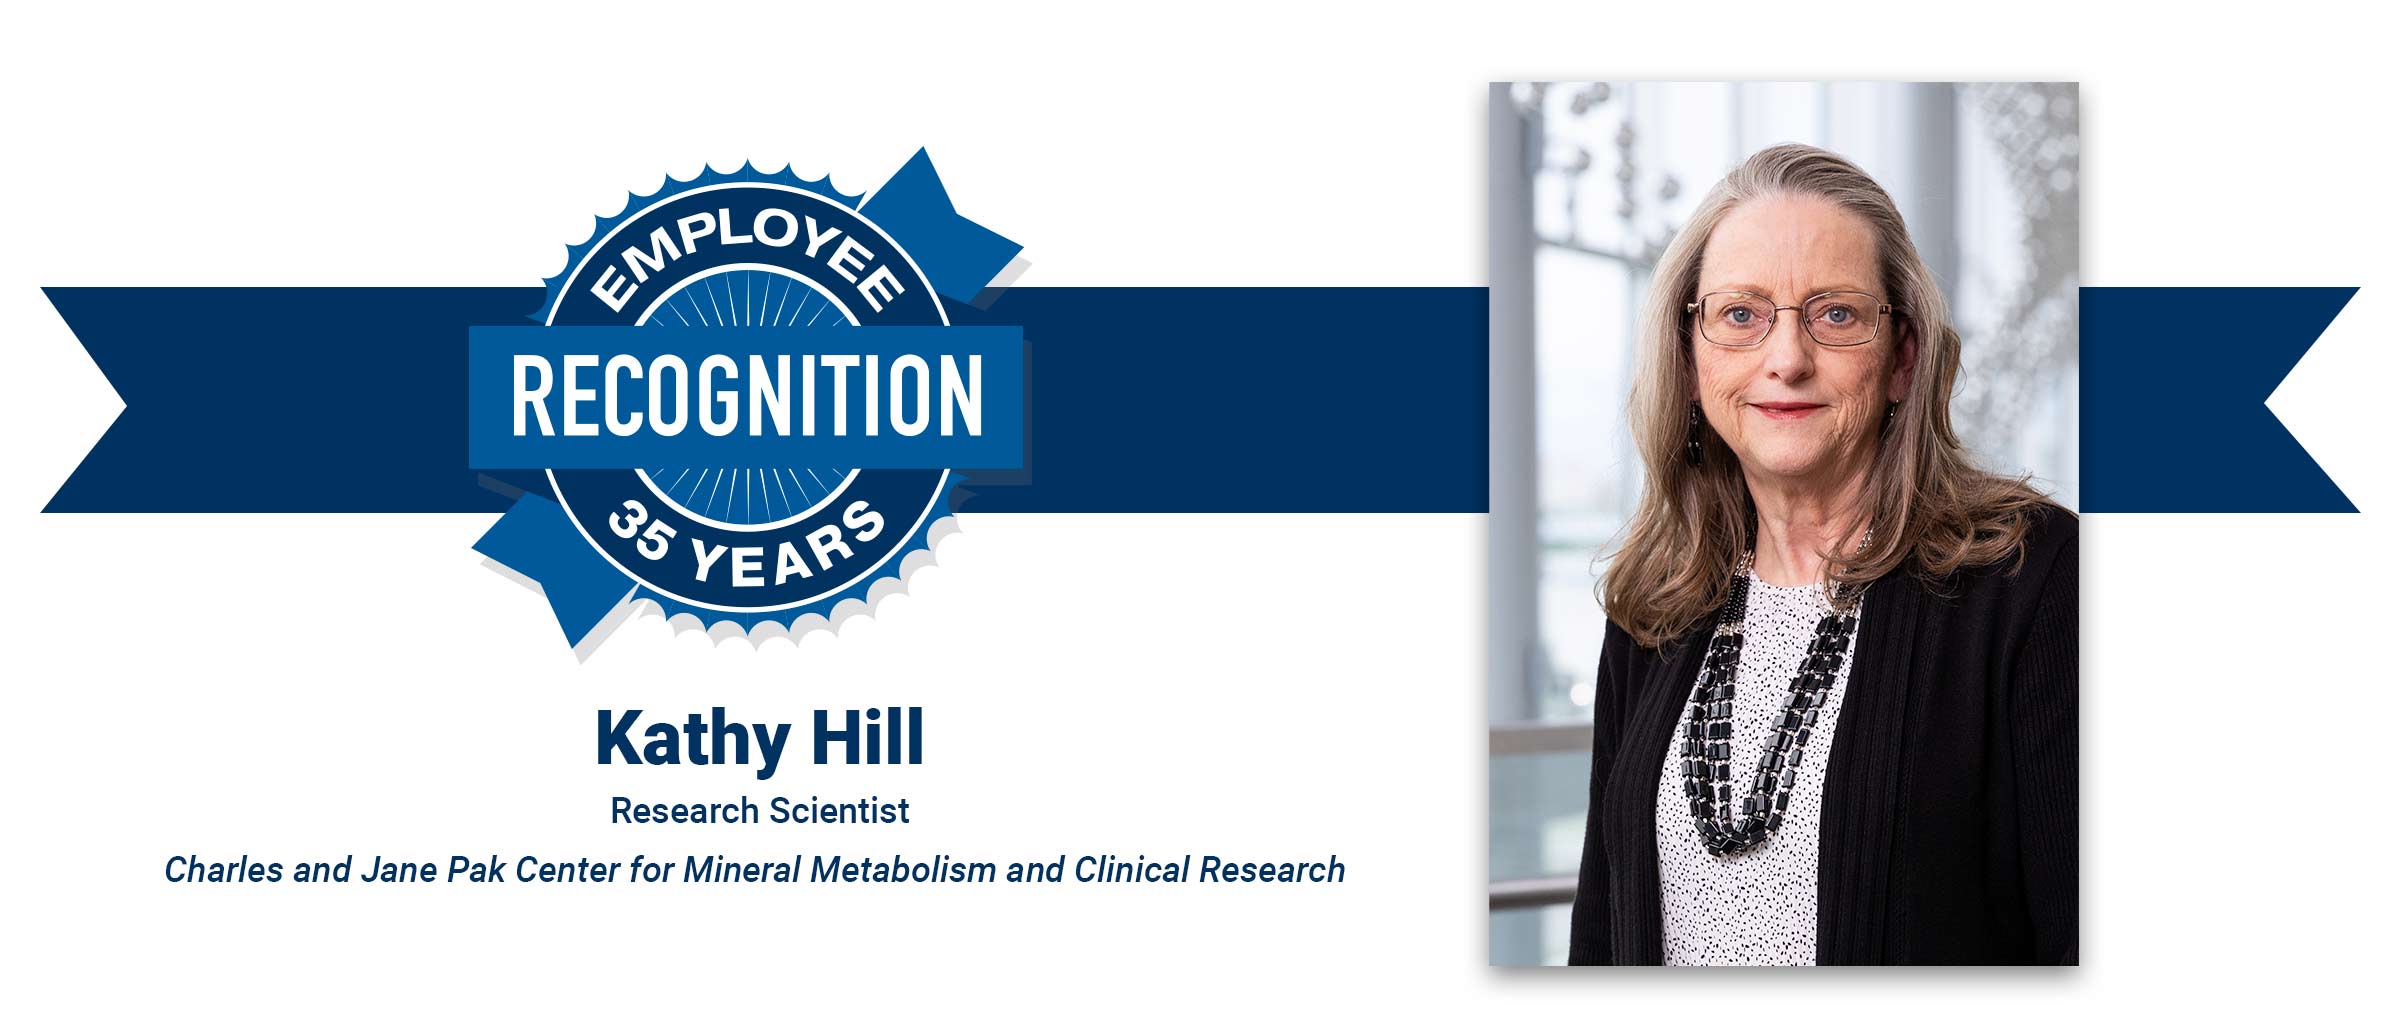 Woman with long hair, glasses, black shirt. Kathy Hill, 35 years employee recognition.